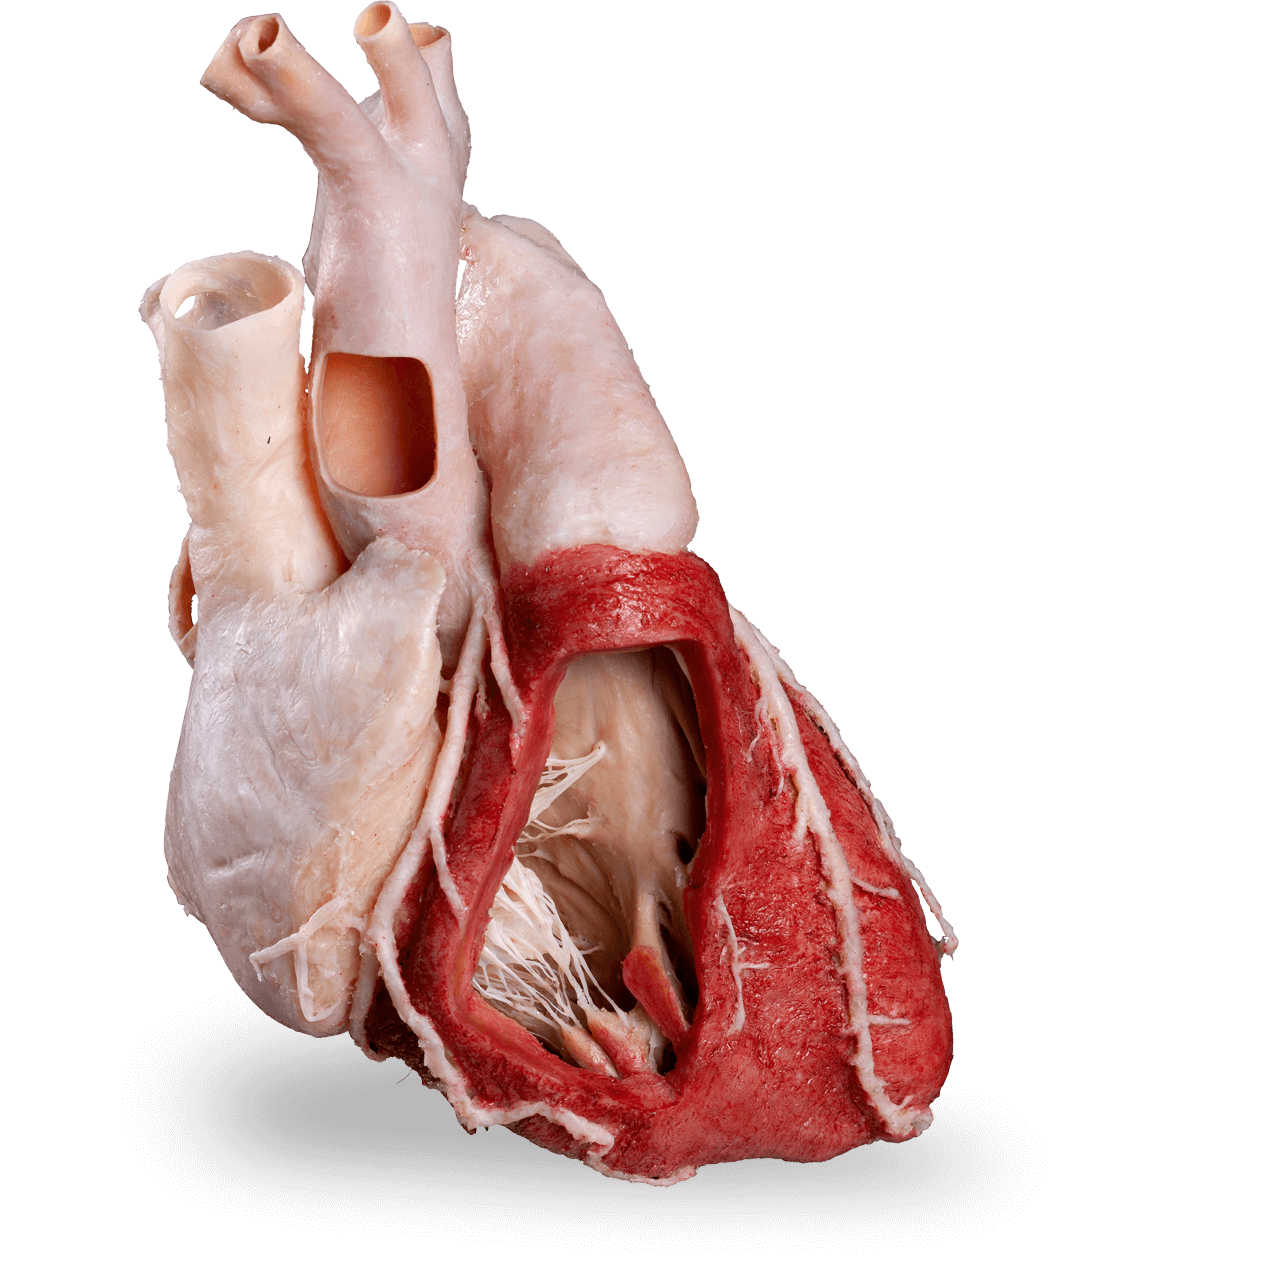 Plastinated human heart used for anatomy training and education.